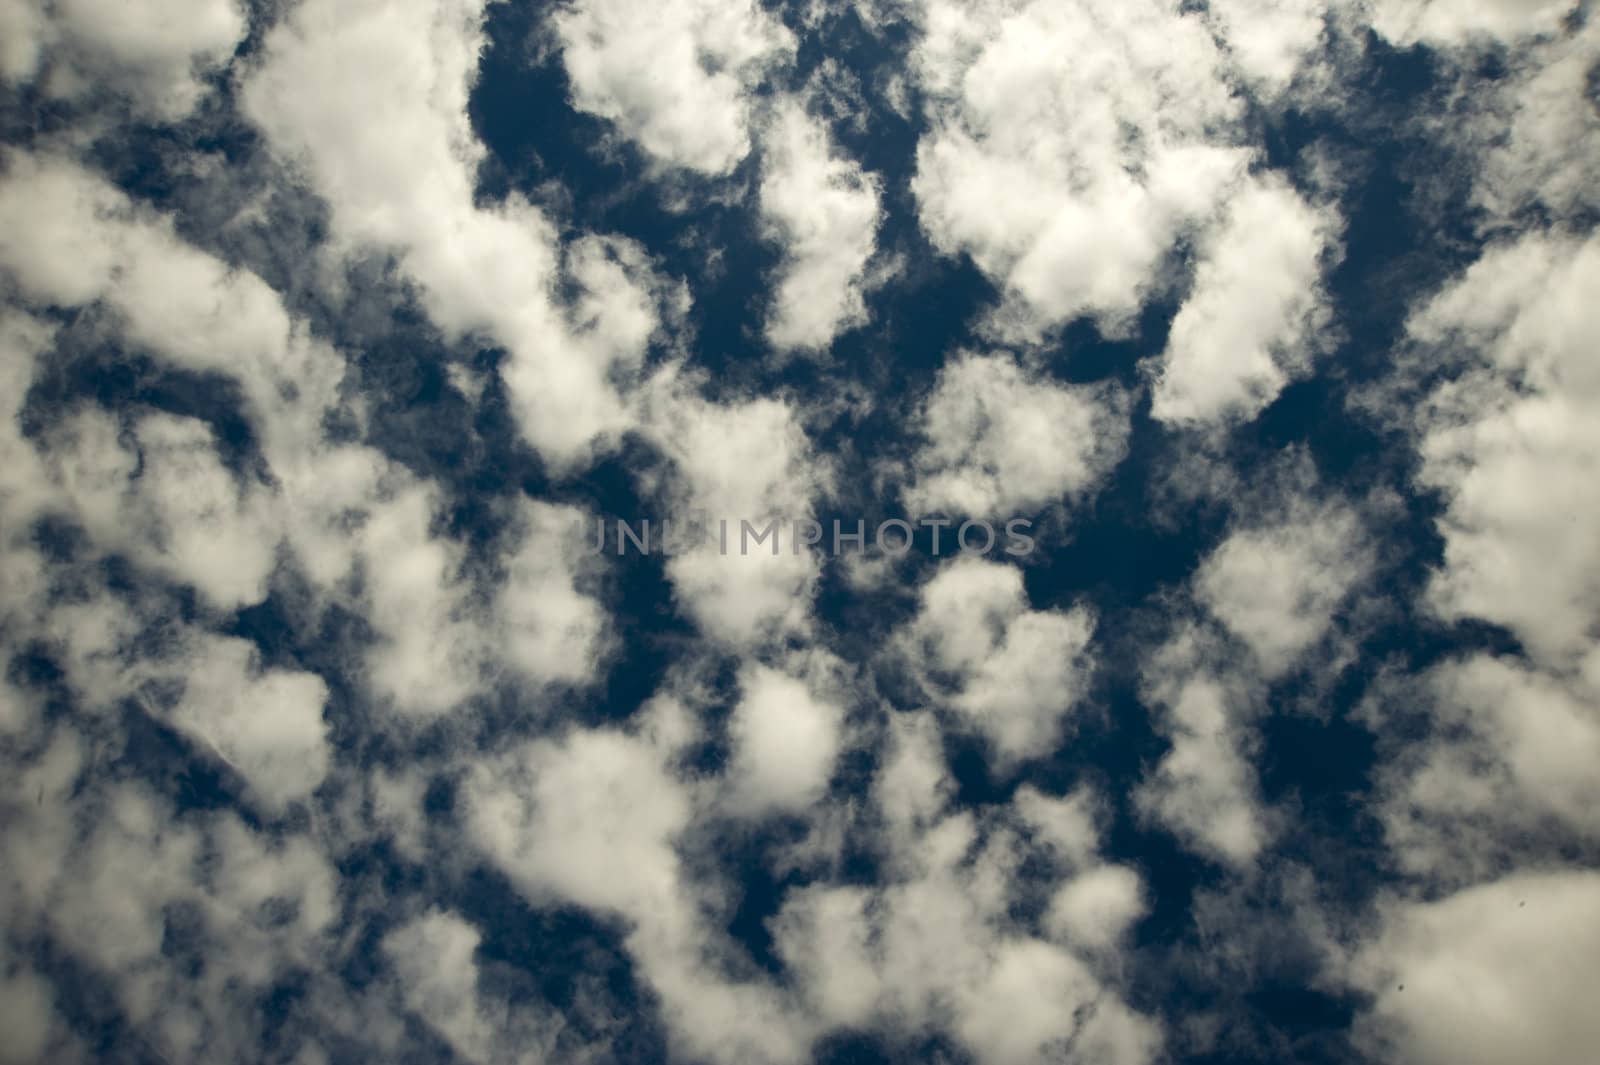 Clouds by Alenmax